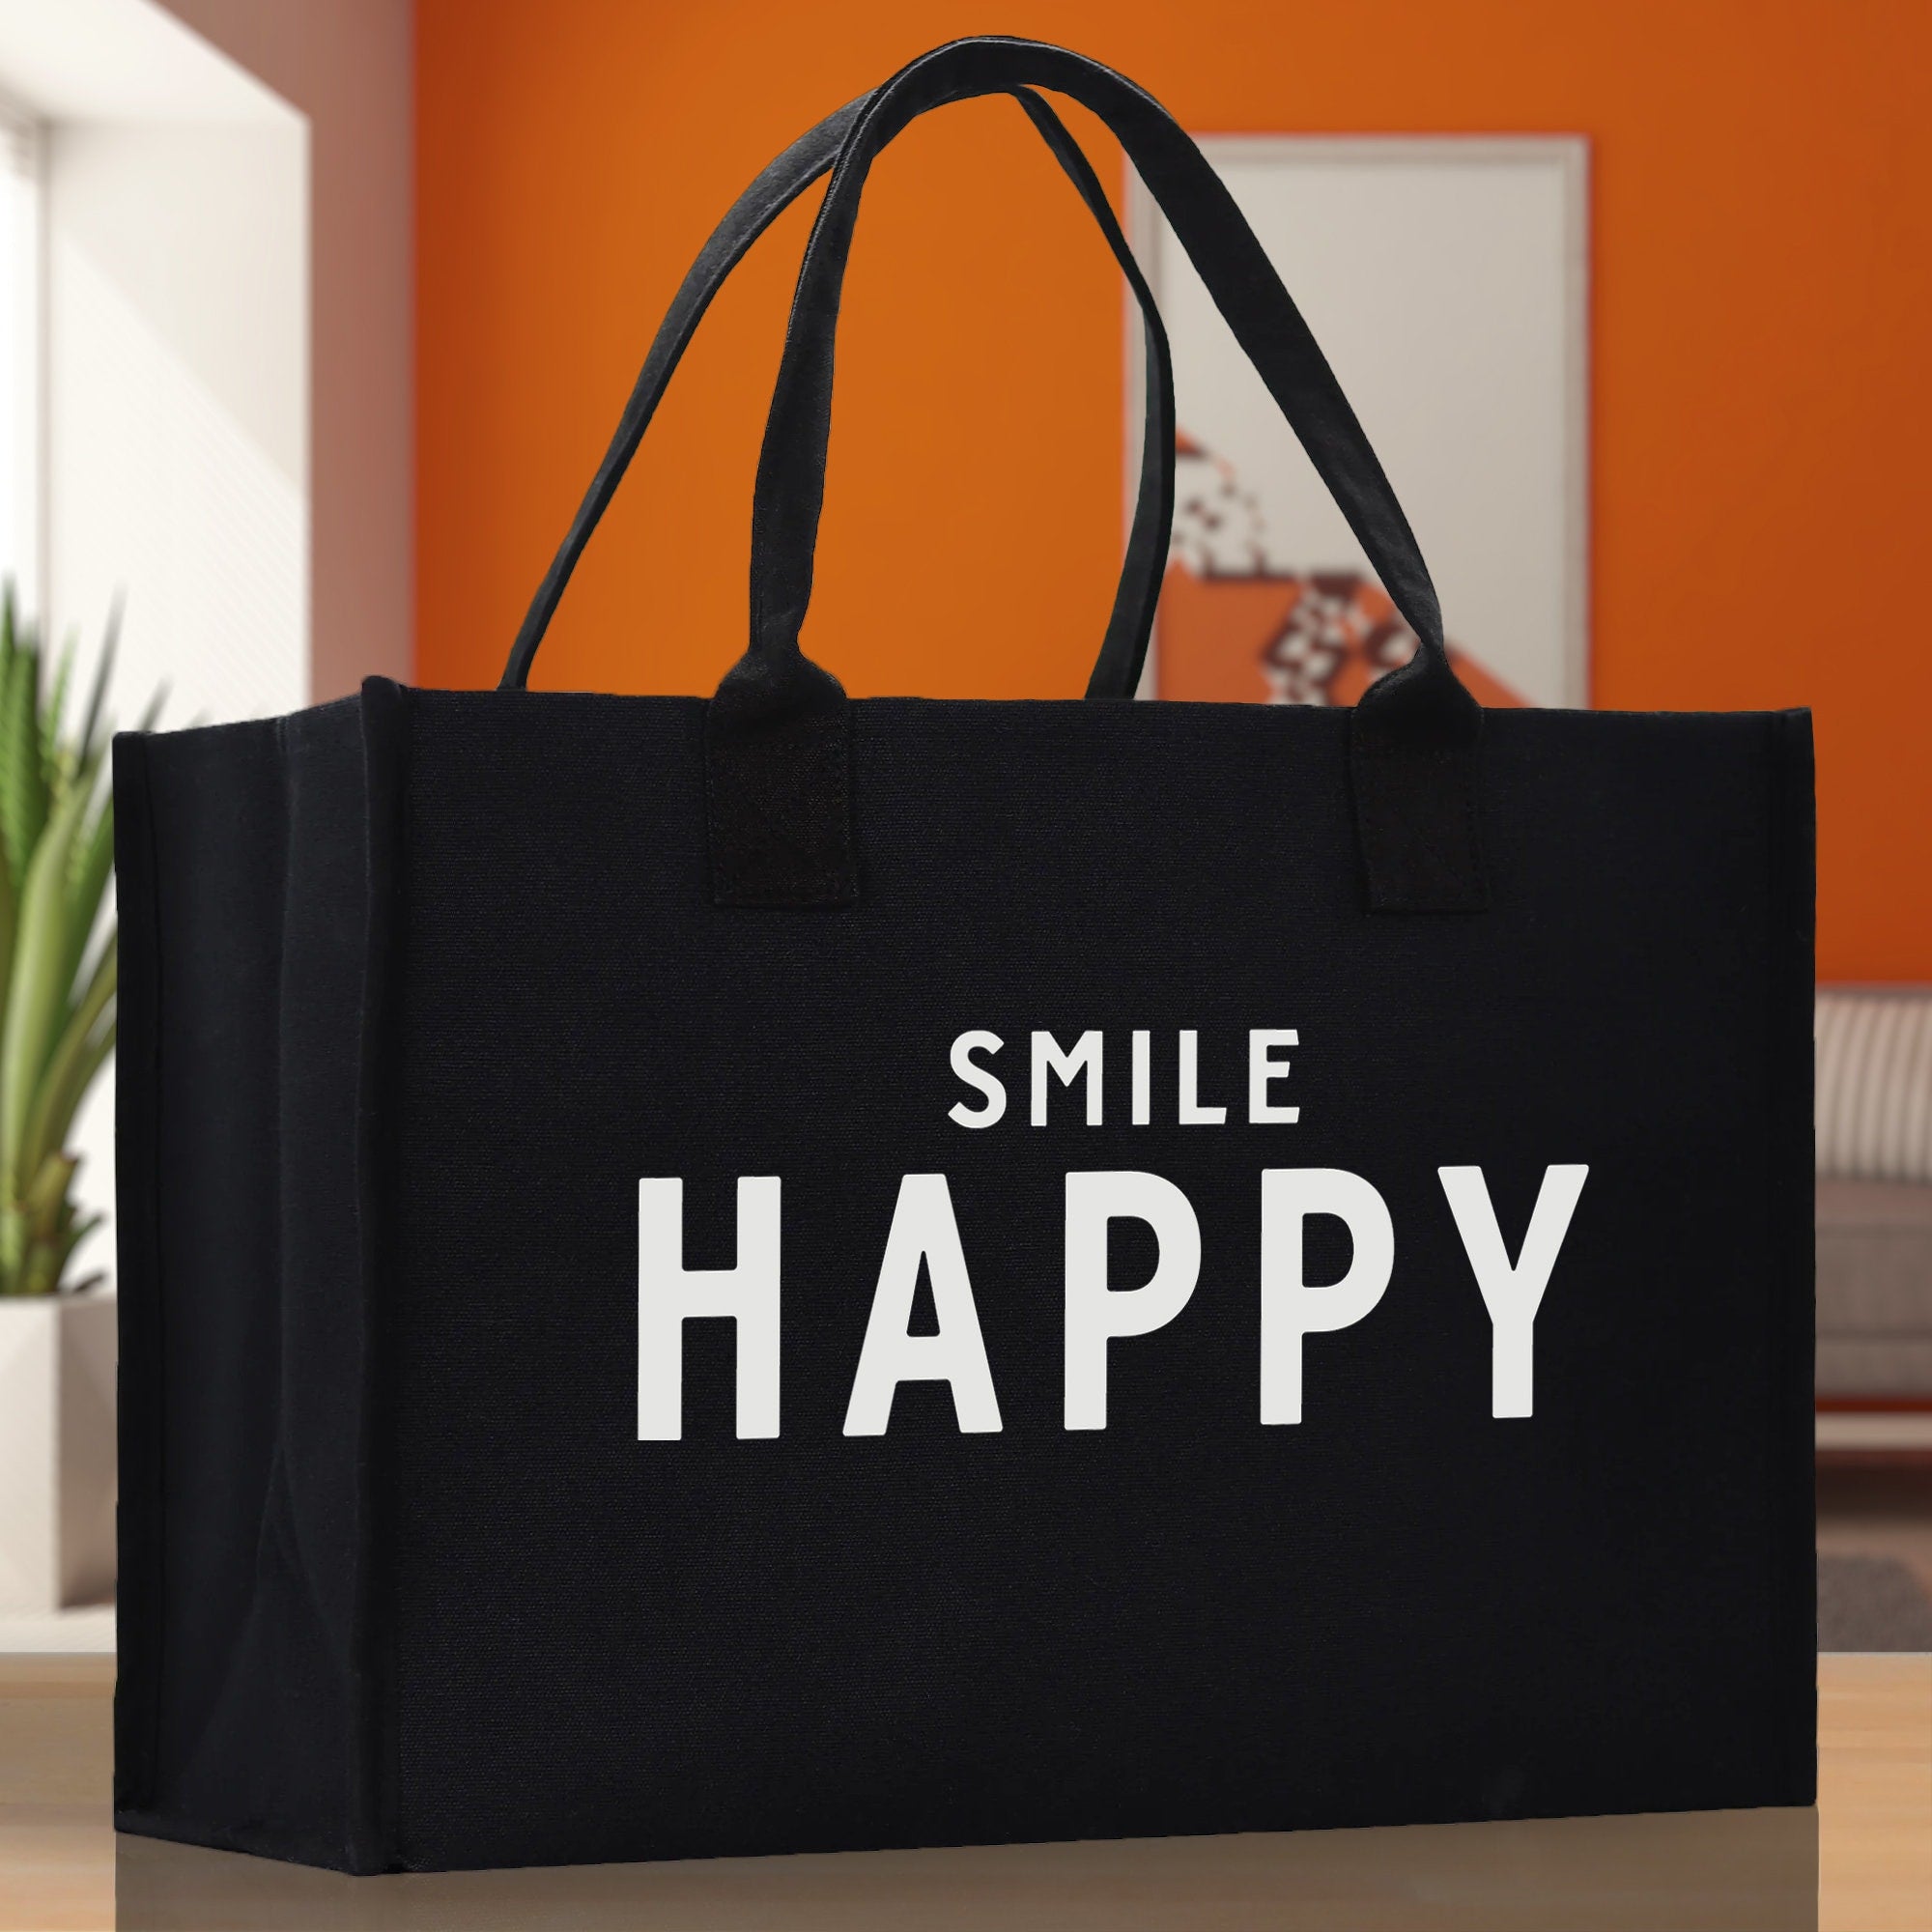 Smile Happy Cotton Canvas Chic Beach Tote Bag Multipurpose Tote Weekender Tote Gift for Her Outdoor Tote Vacation Tote Large Beach Bag